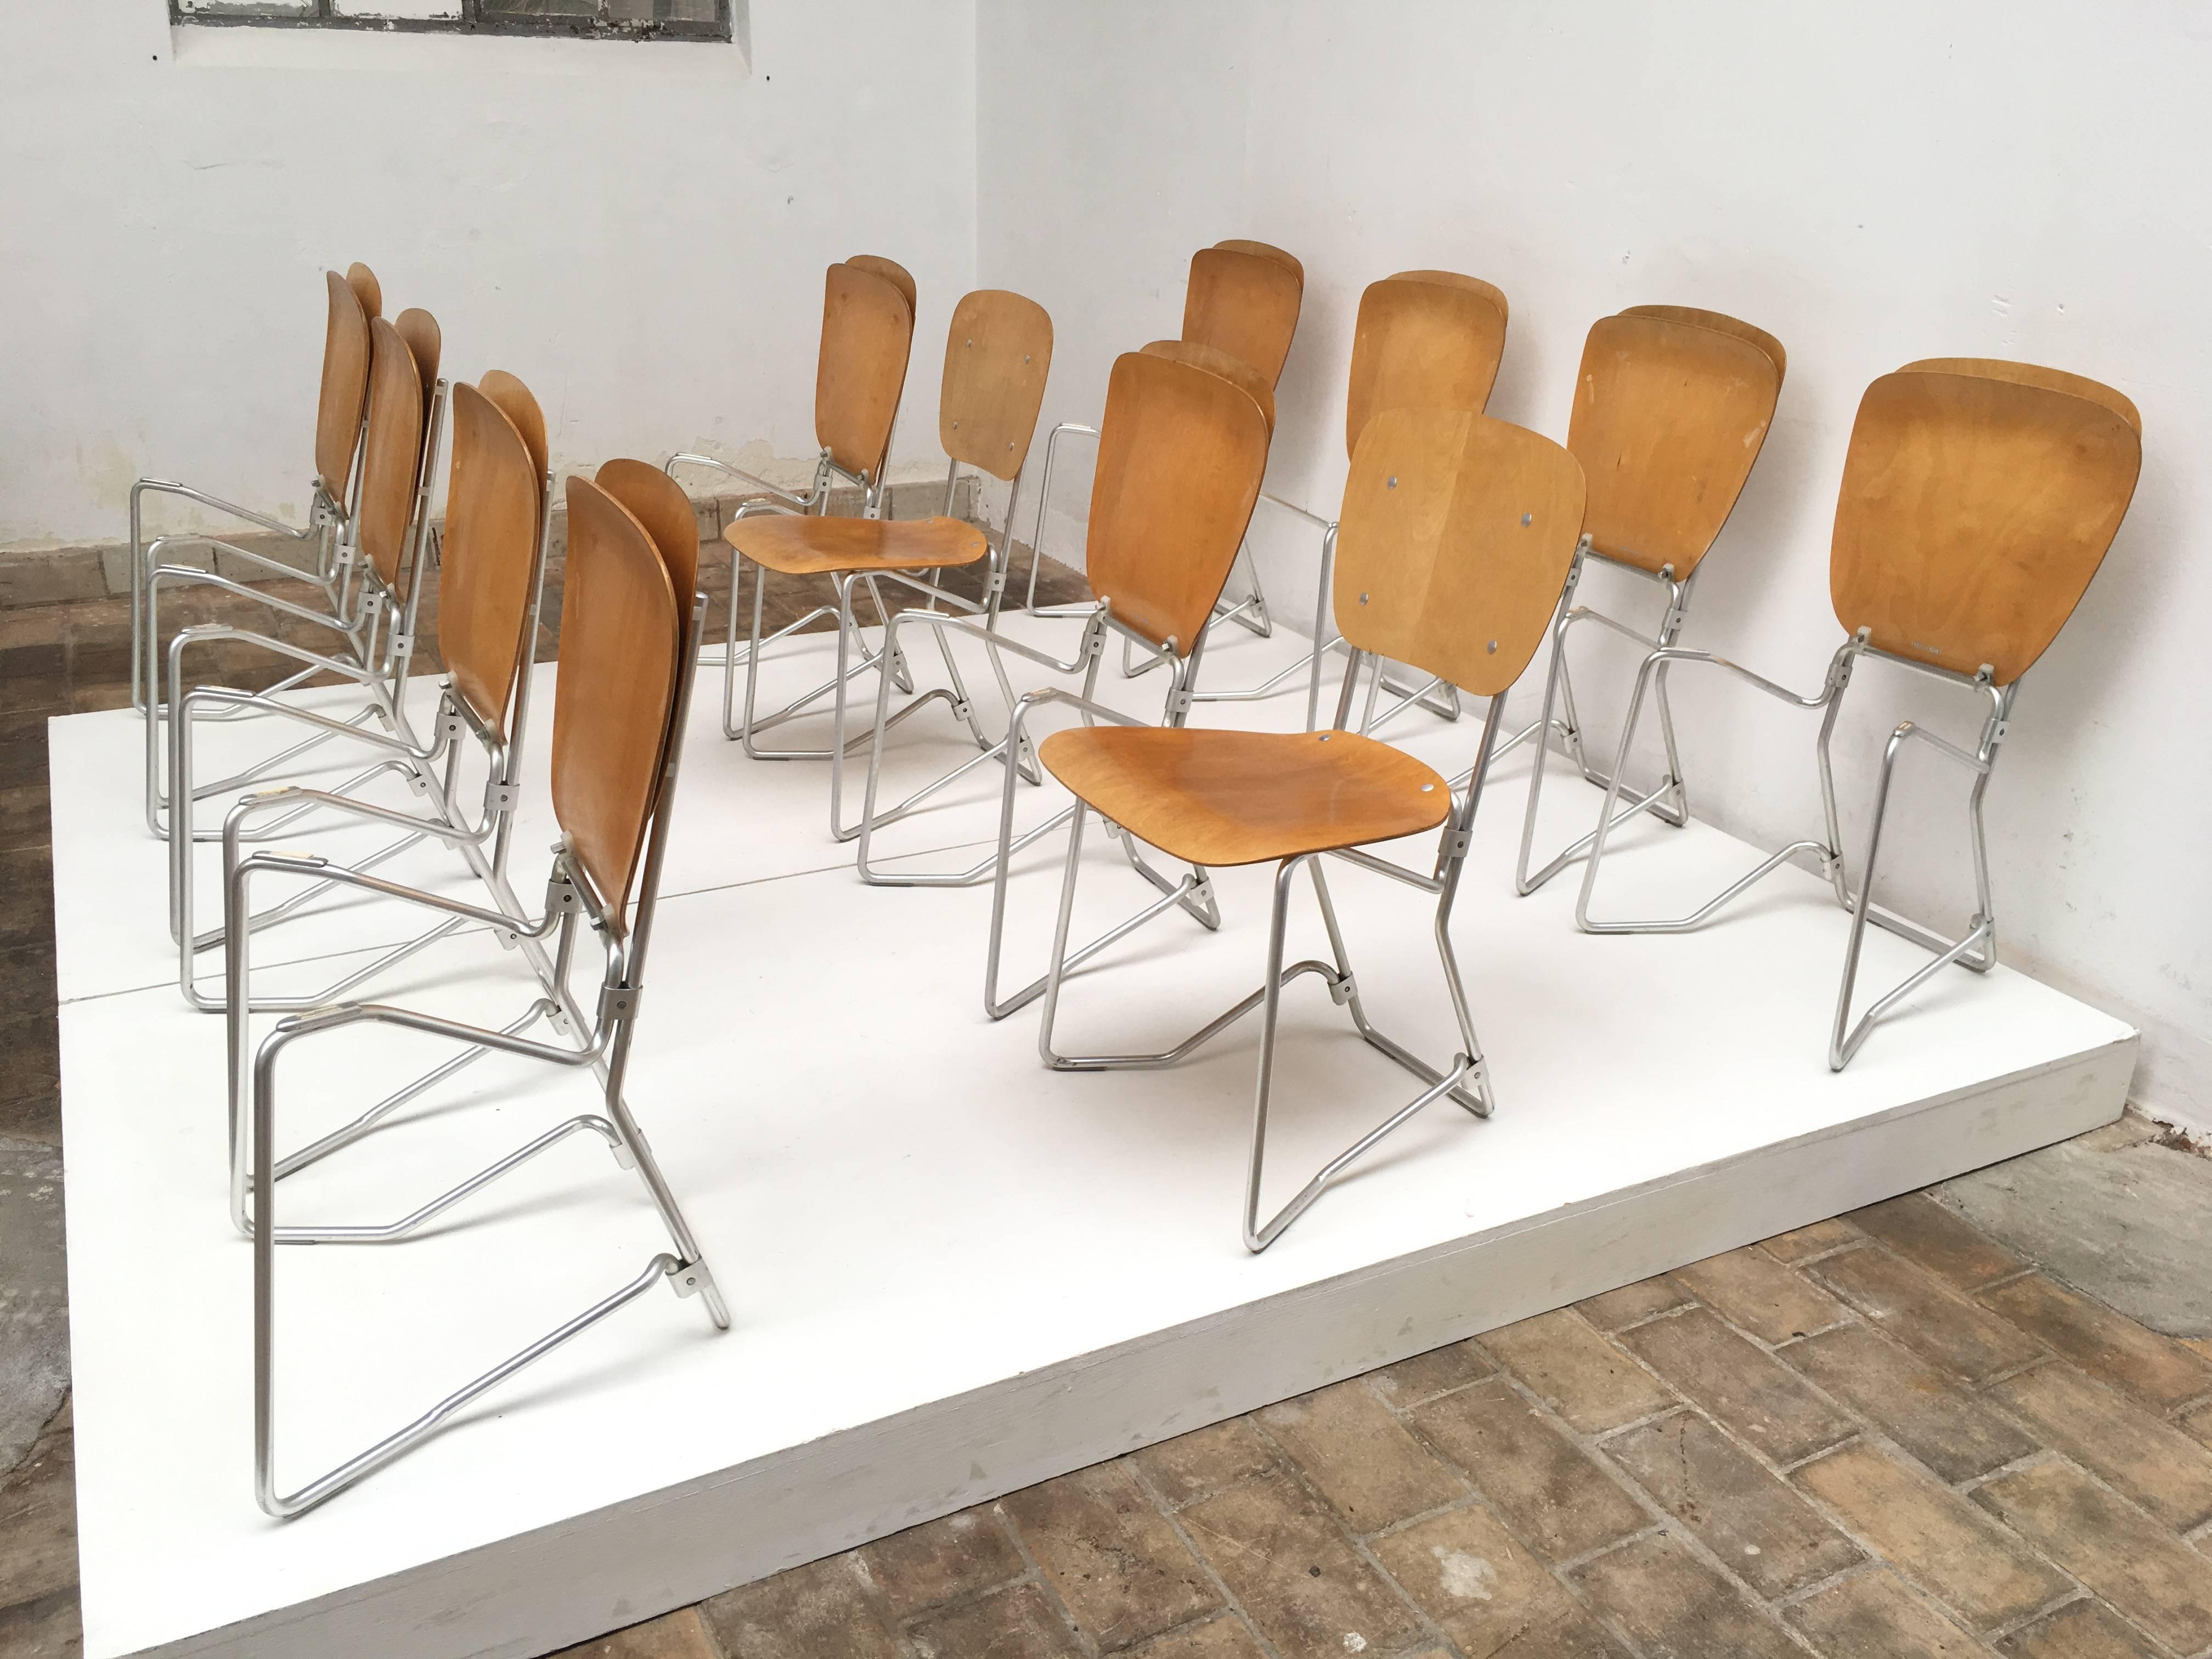 Mid-20th Century 12 Birch and Aluminium Chairs by Armin Wirth for Aluflex, Switzerland, 1951 For Sale